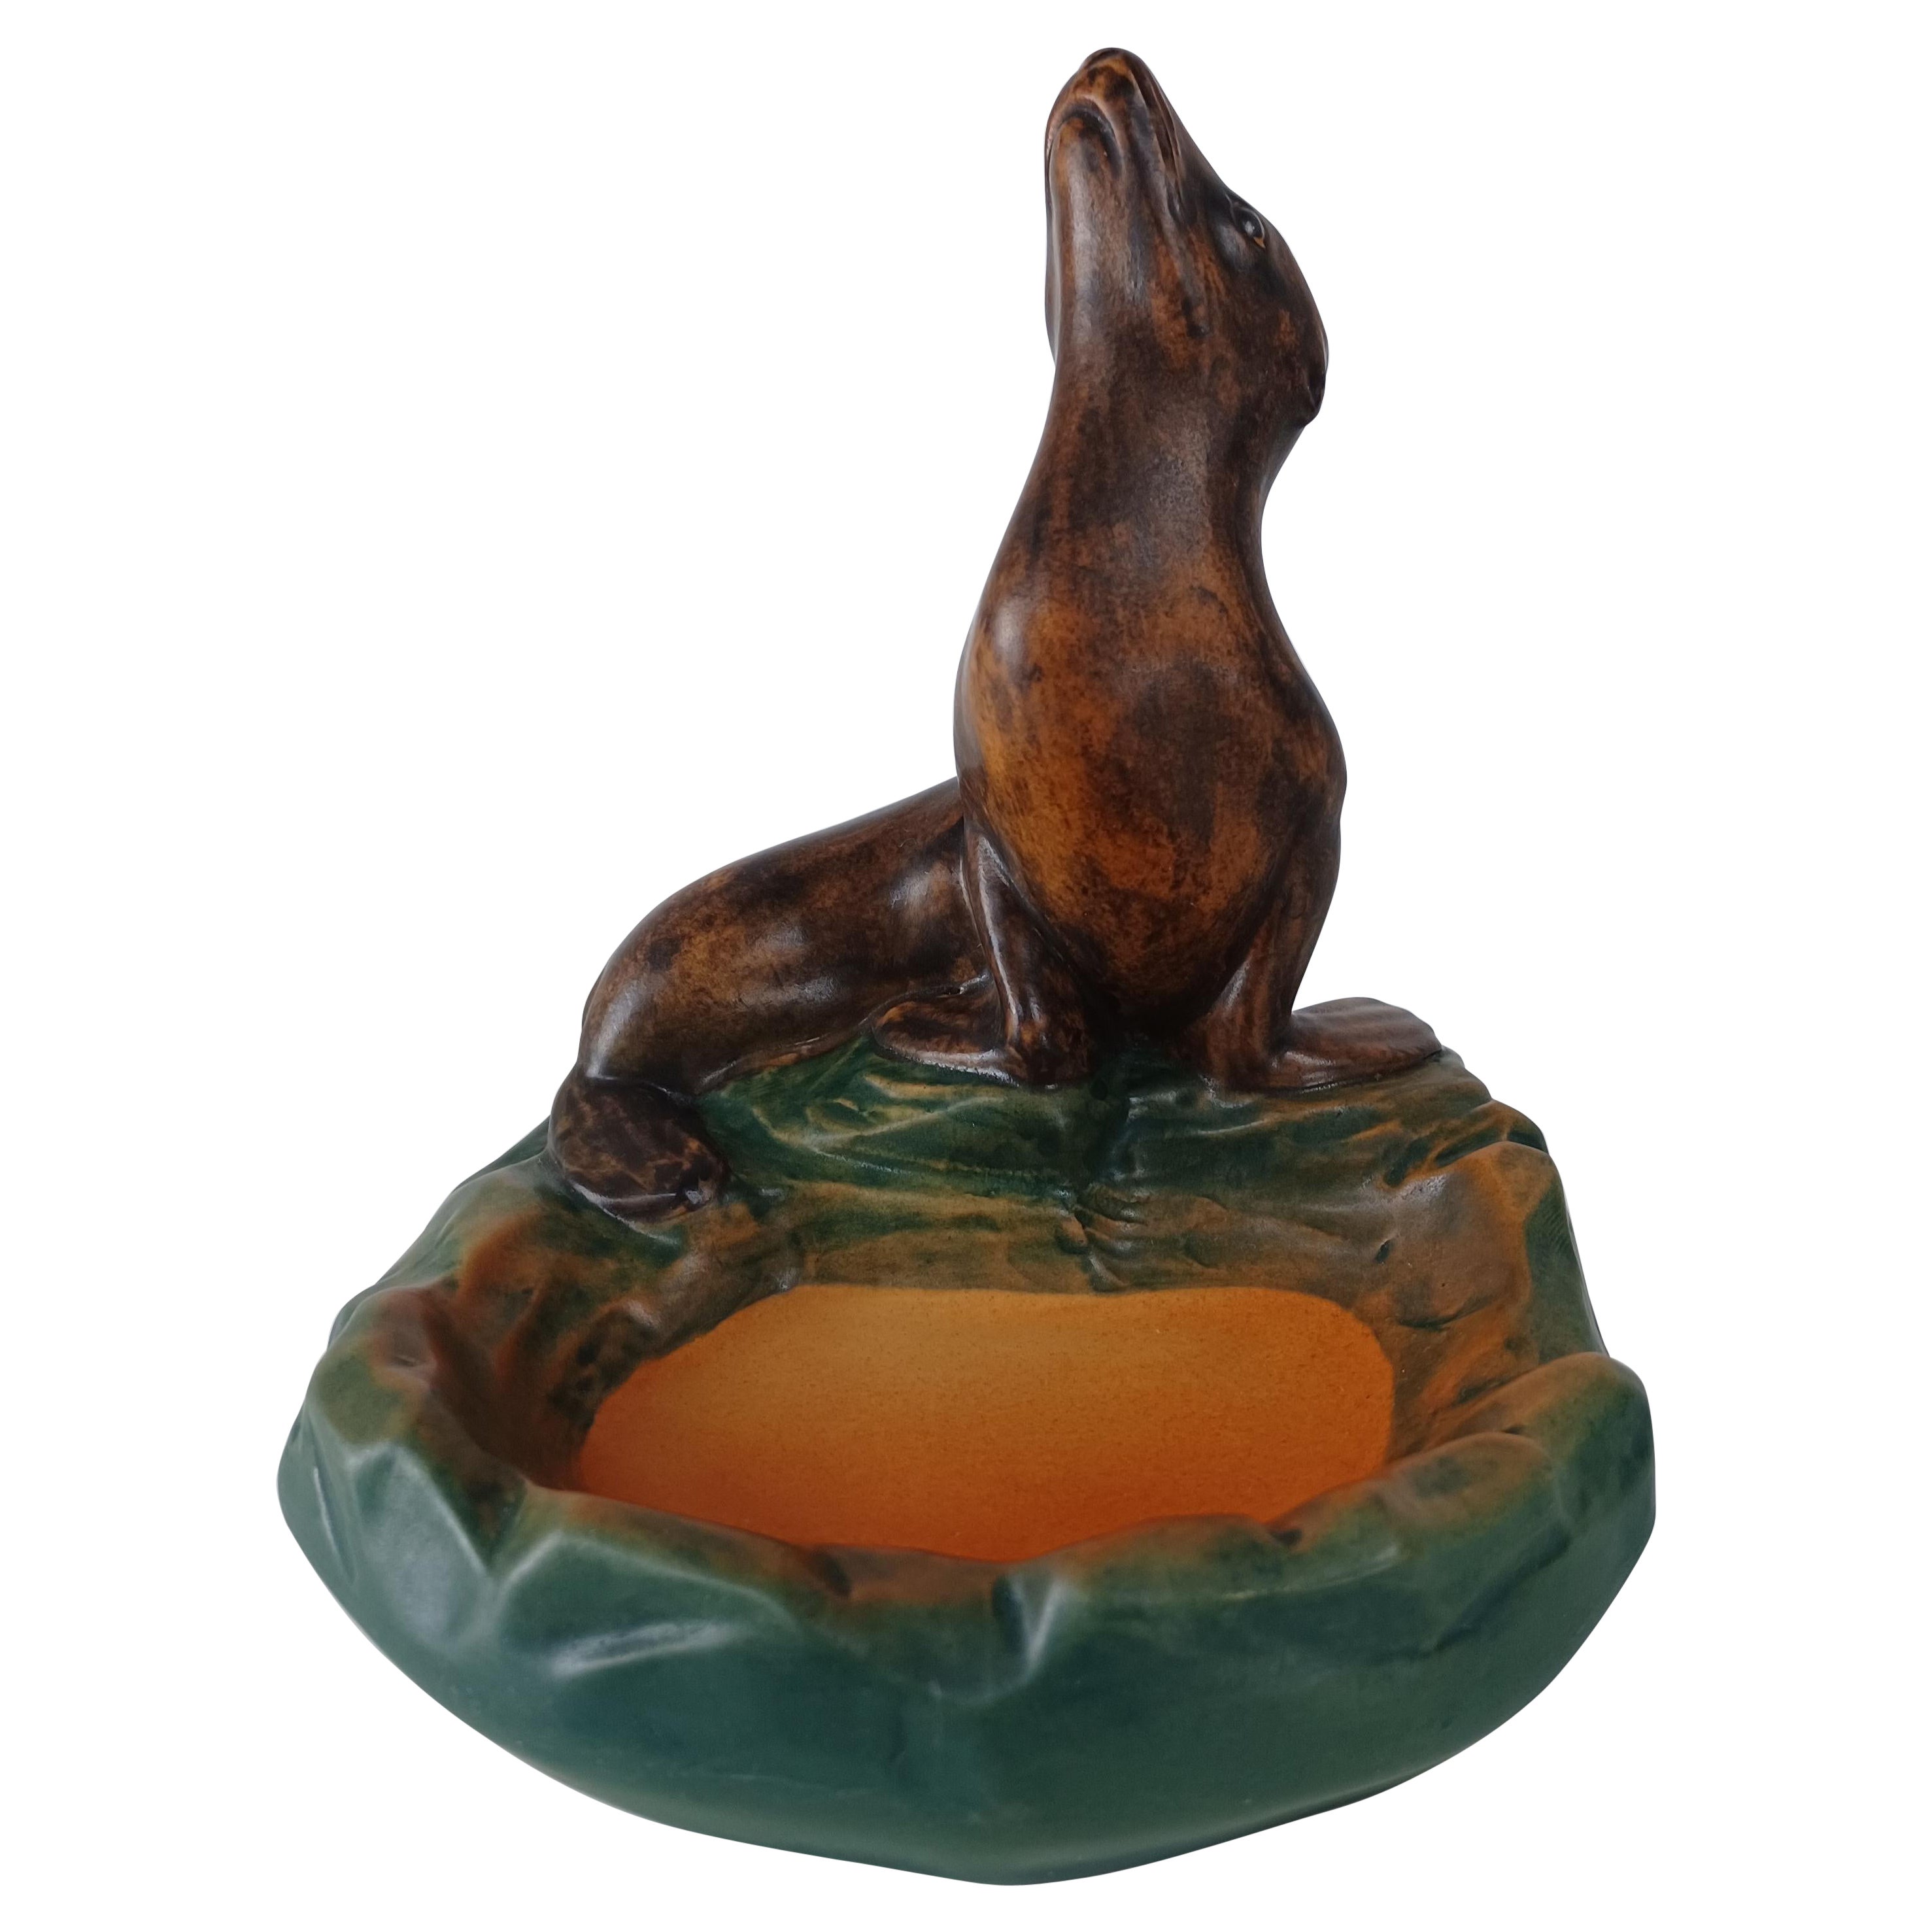 1920s Danish Hand-Crafted Art Nouveau Seal Ash Tray / Bowl by P. Ipsens Enke For Sale